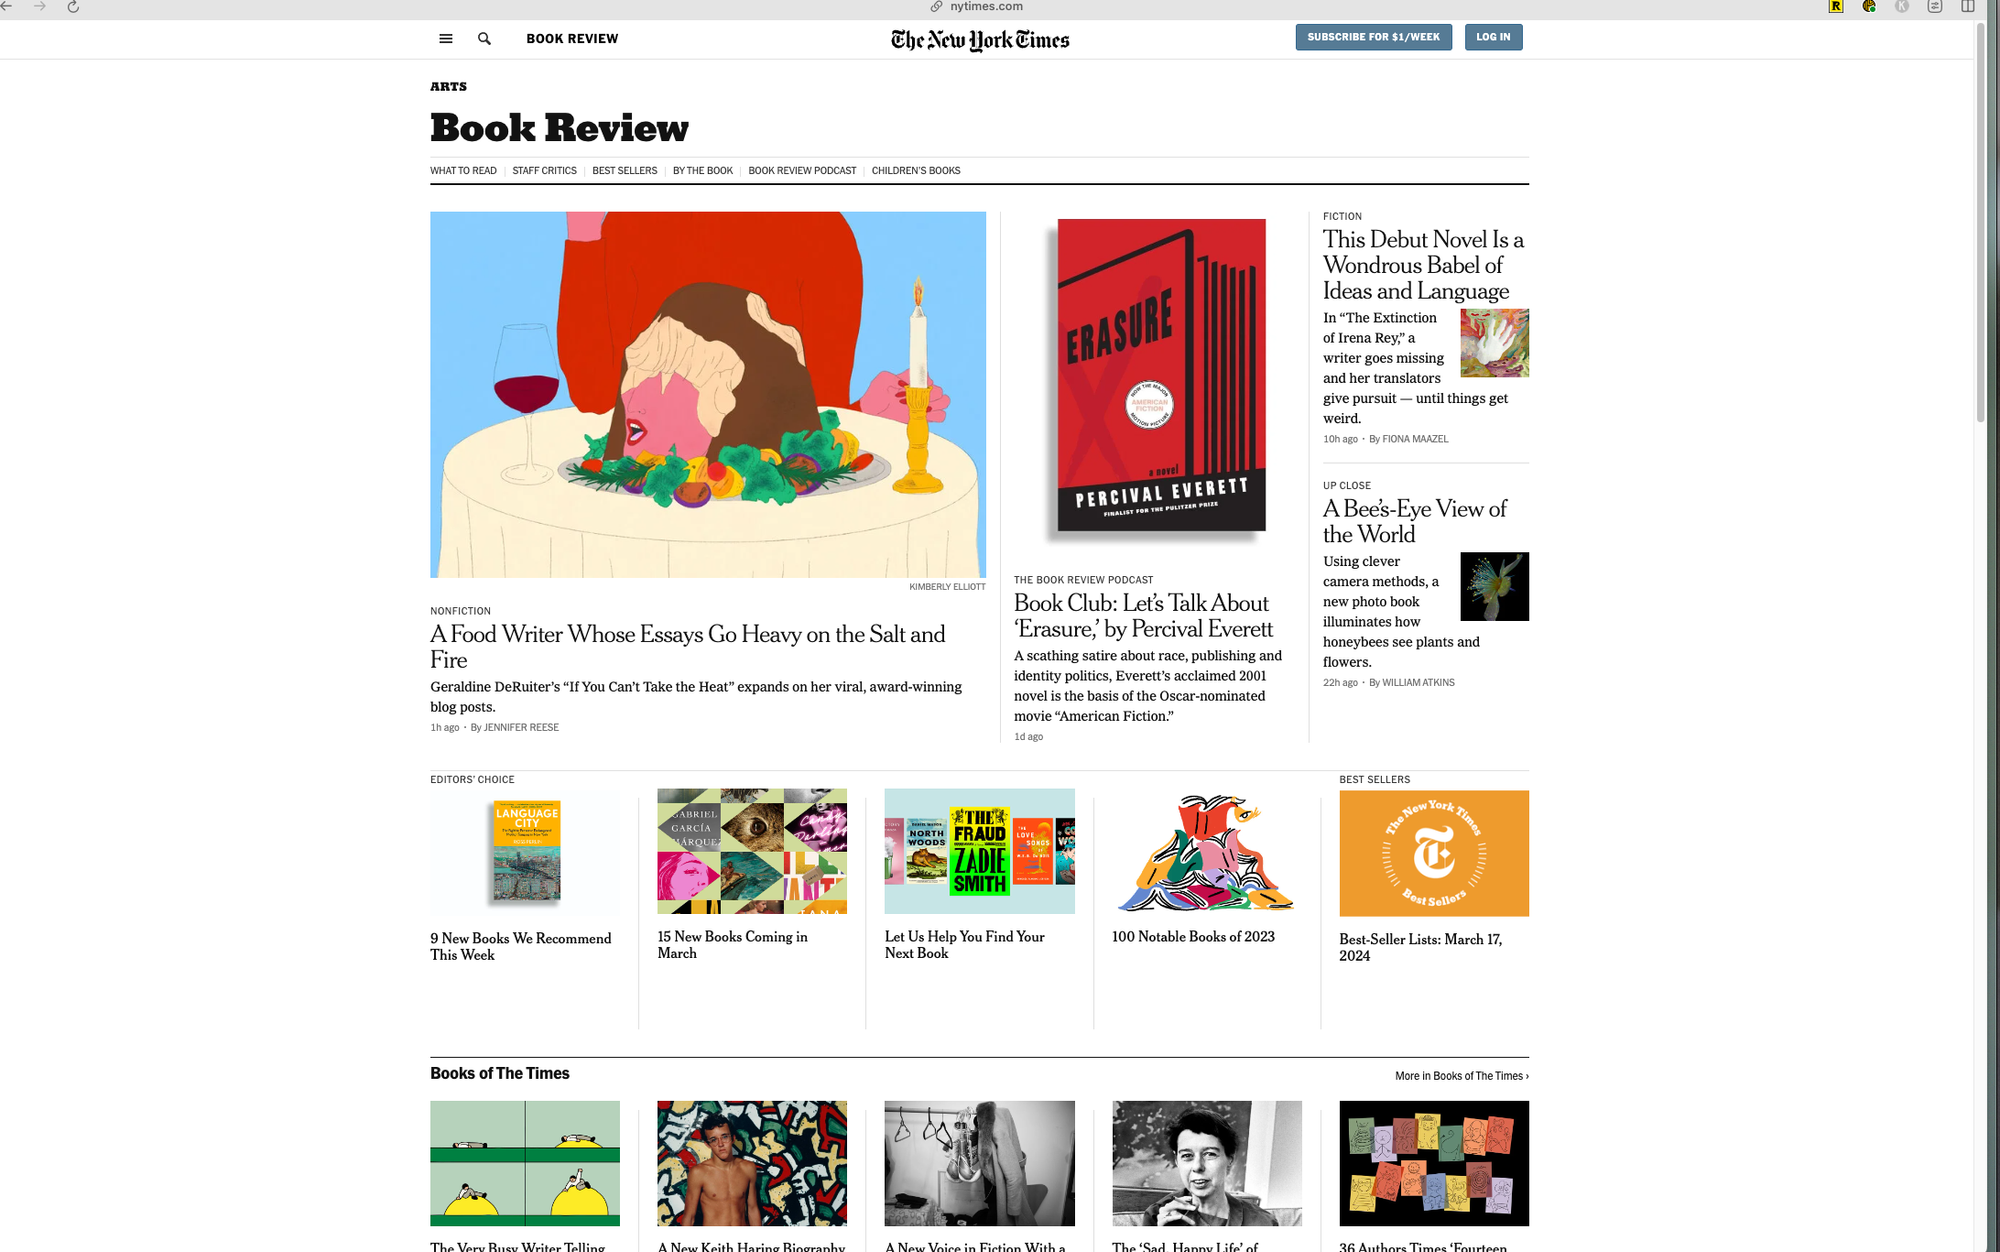 A screenshot of the New York Times “Book Review” page taken at 1:44 pm on March 9, 2024.